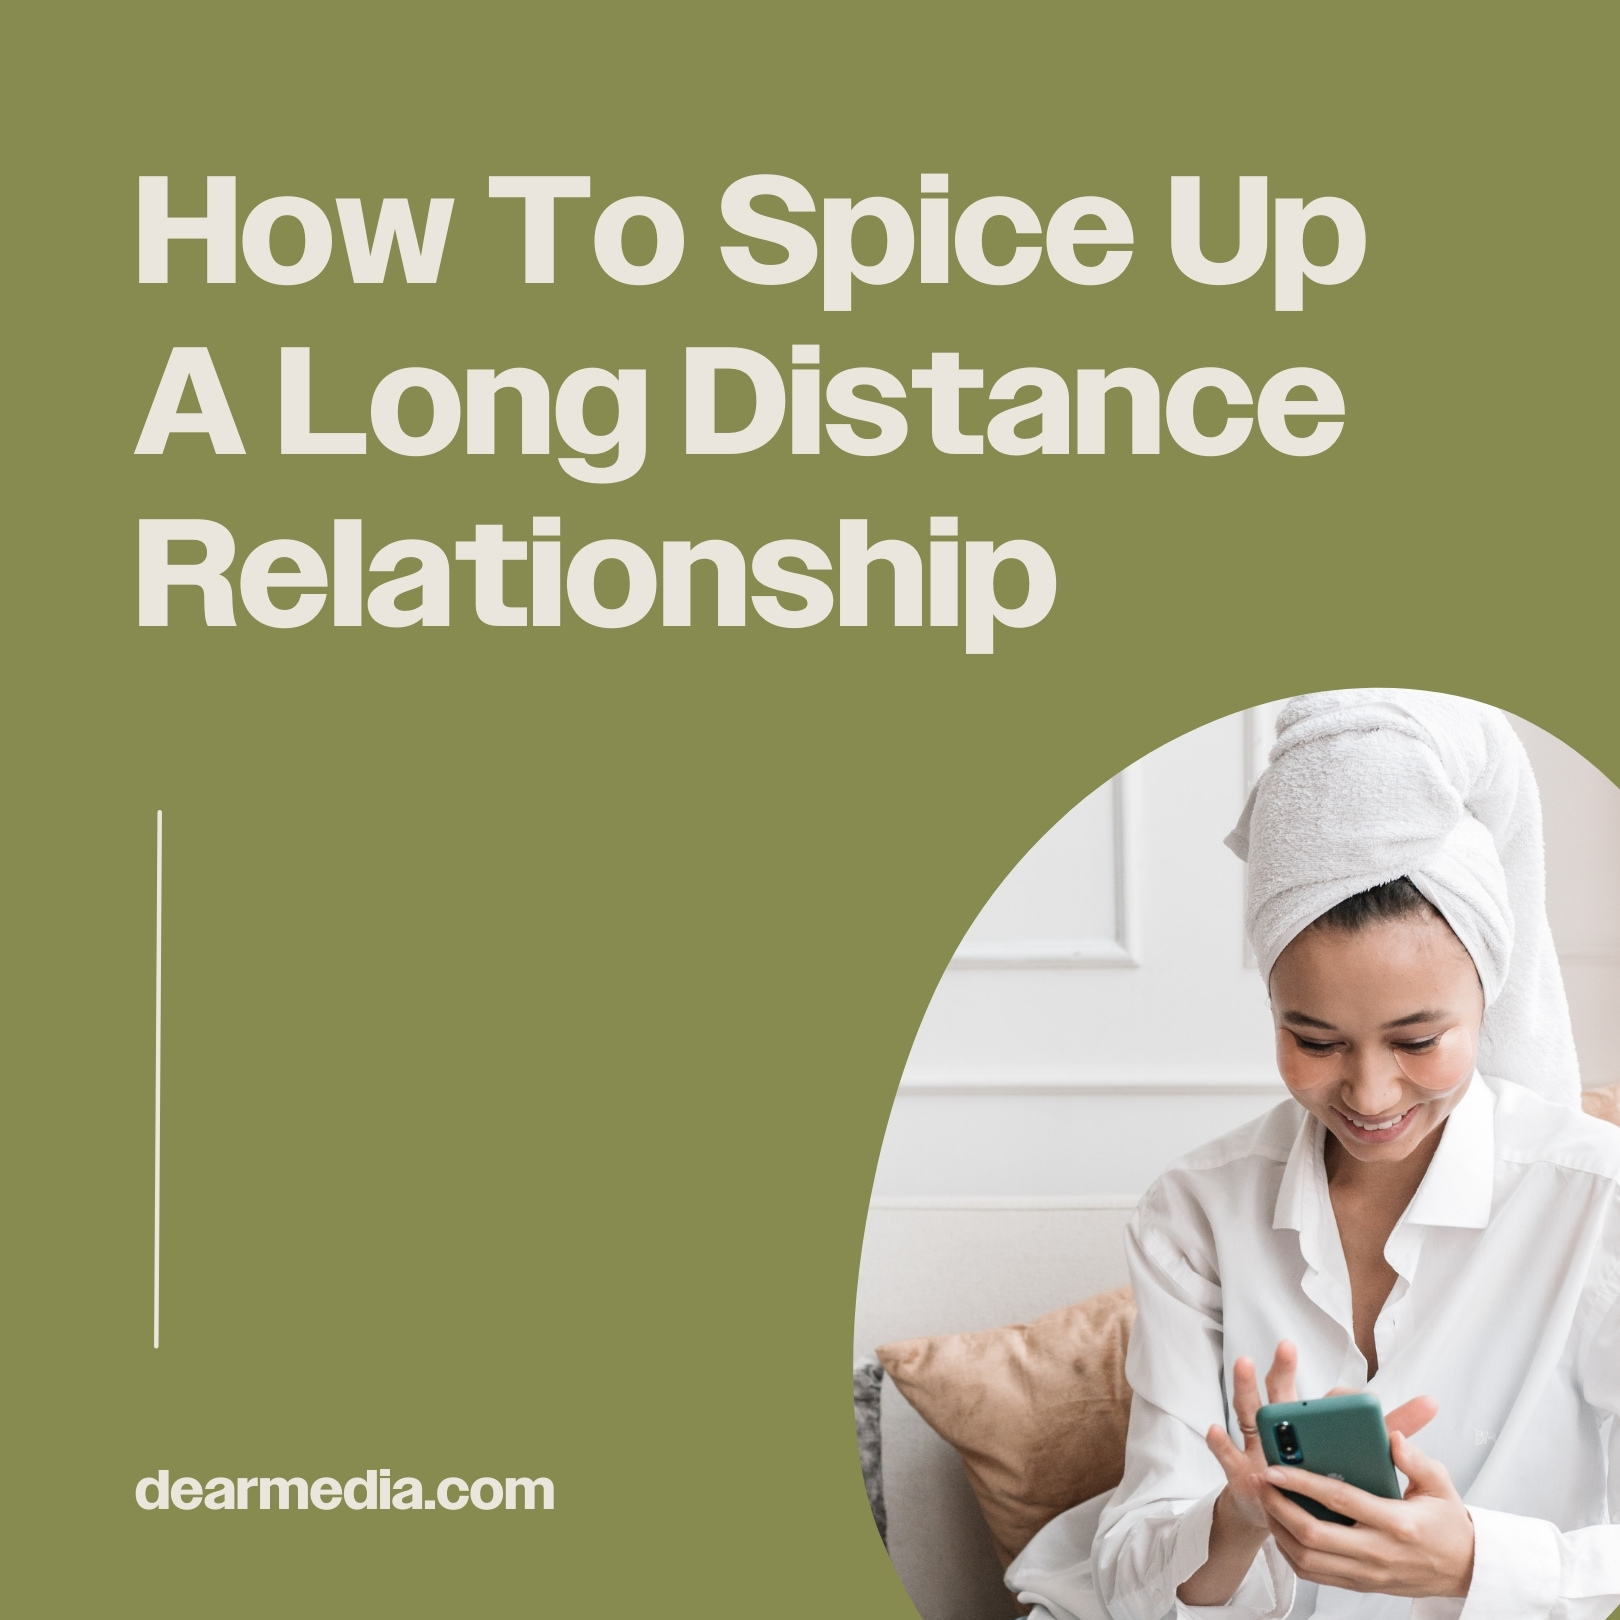 How To Spice Up A Long Distance Relationship